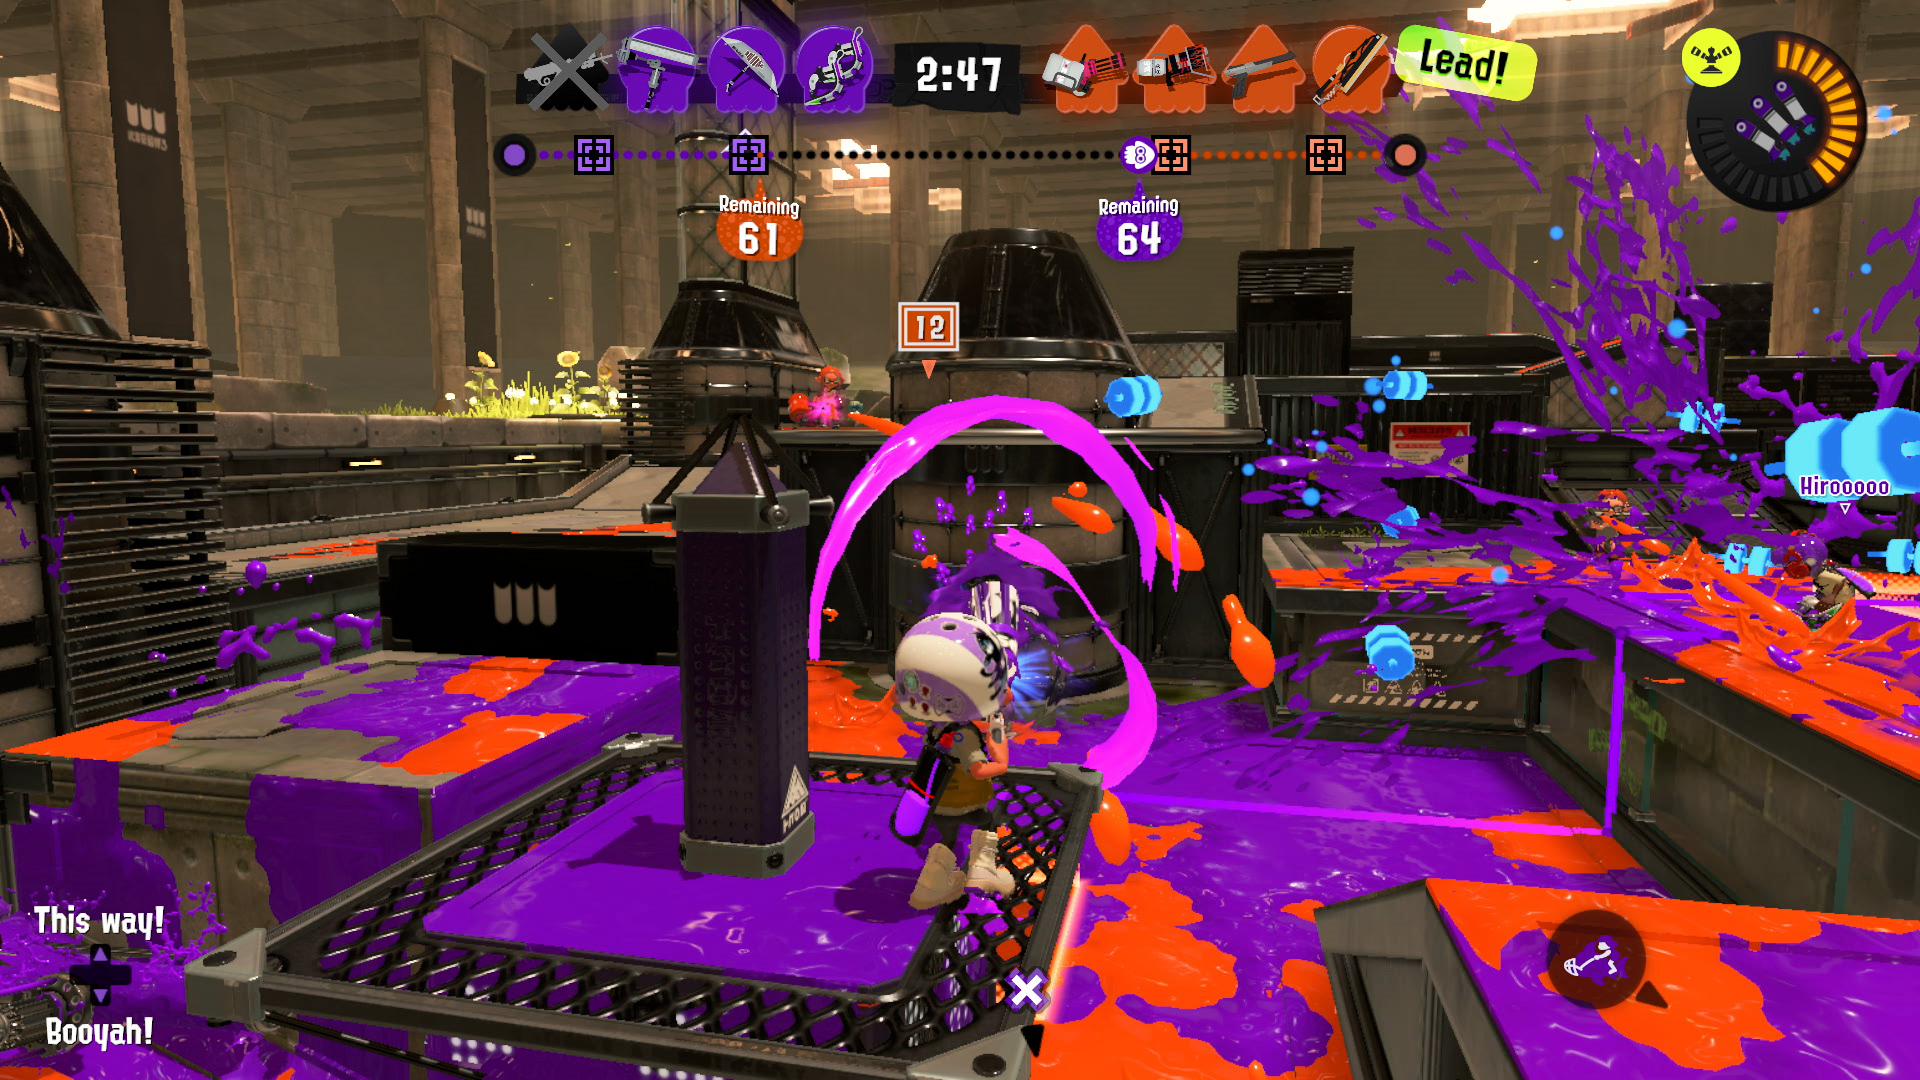 General tips and tricks for Tower Control in Splatoon 3